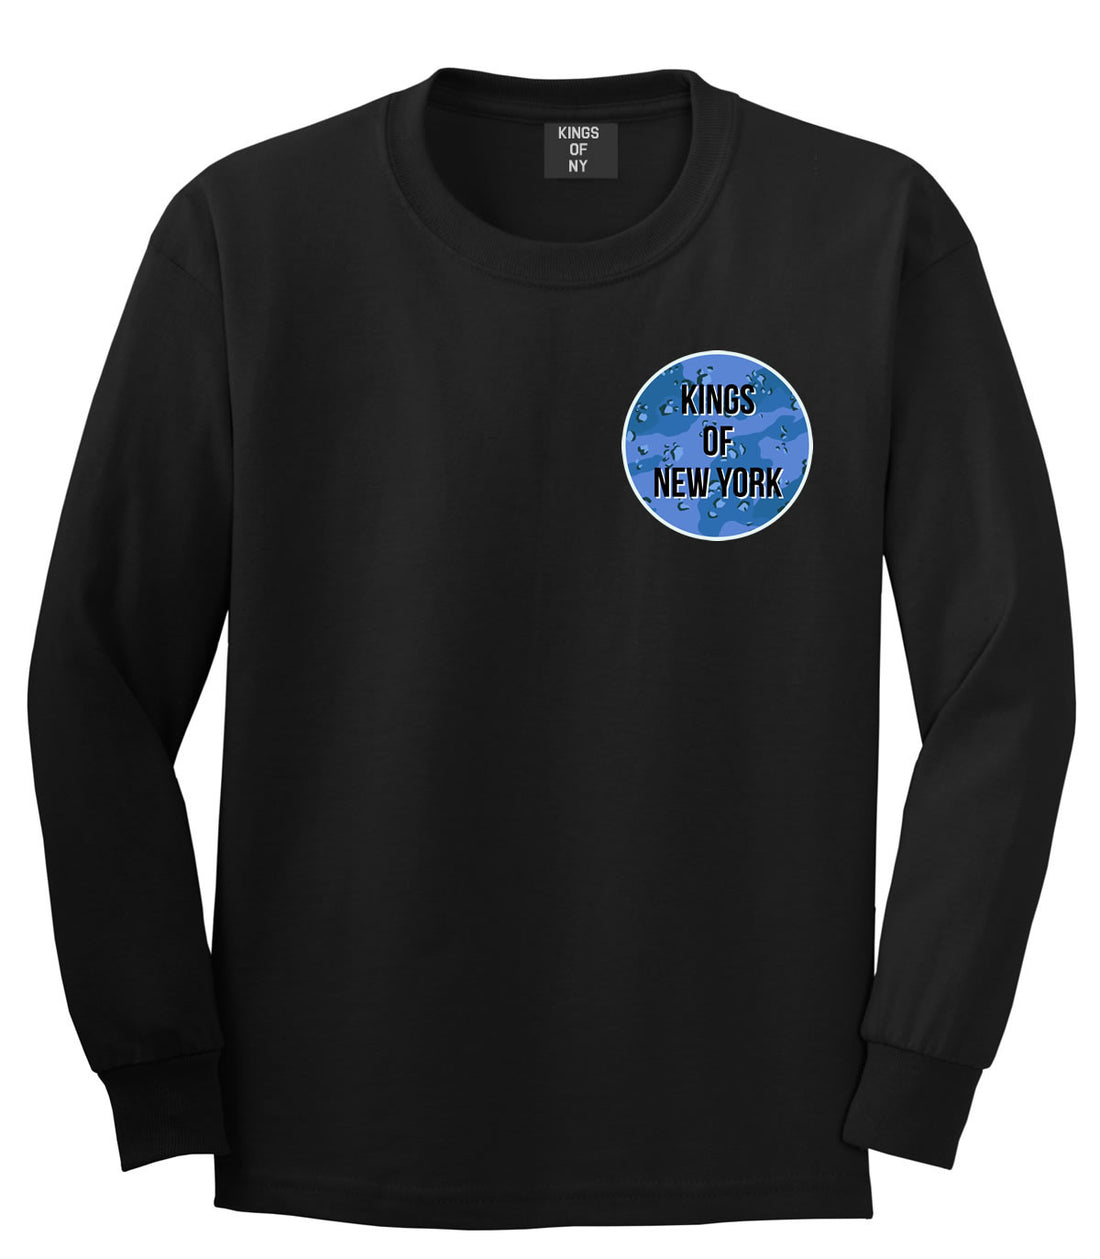  Army Chest Logo Armed Force Boys Kids Long Sleeve T-Shirt in Black by Kings Of NY